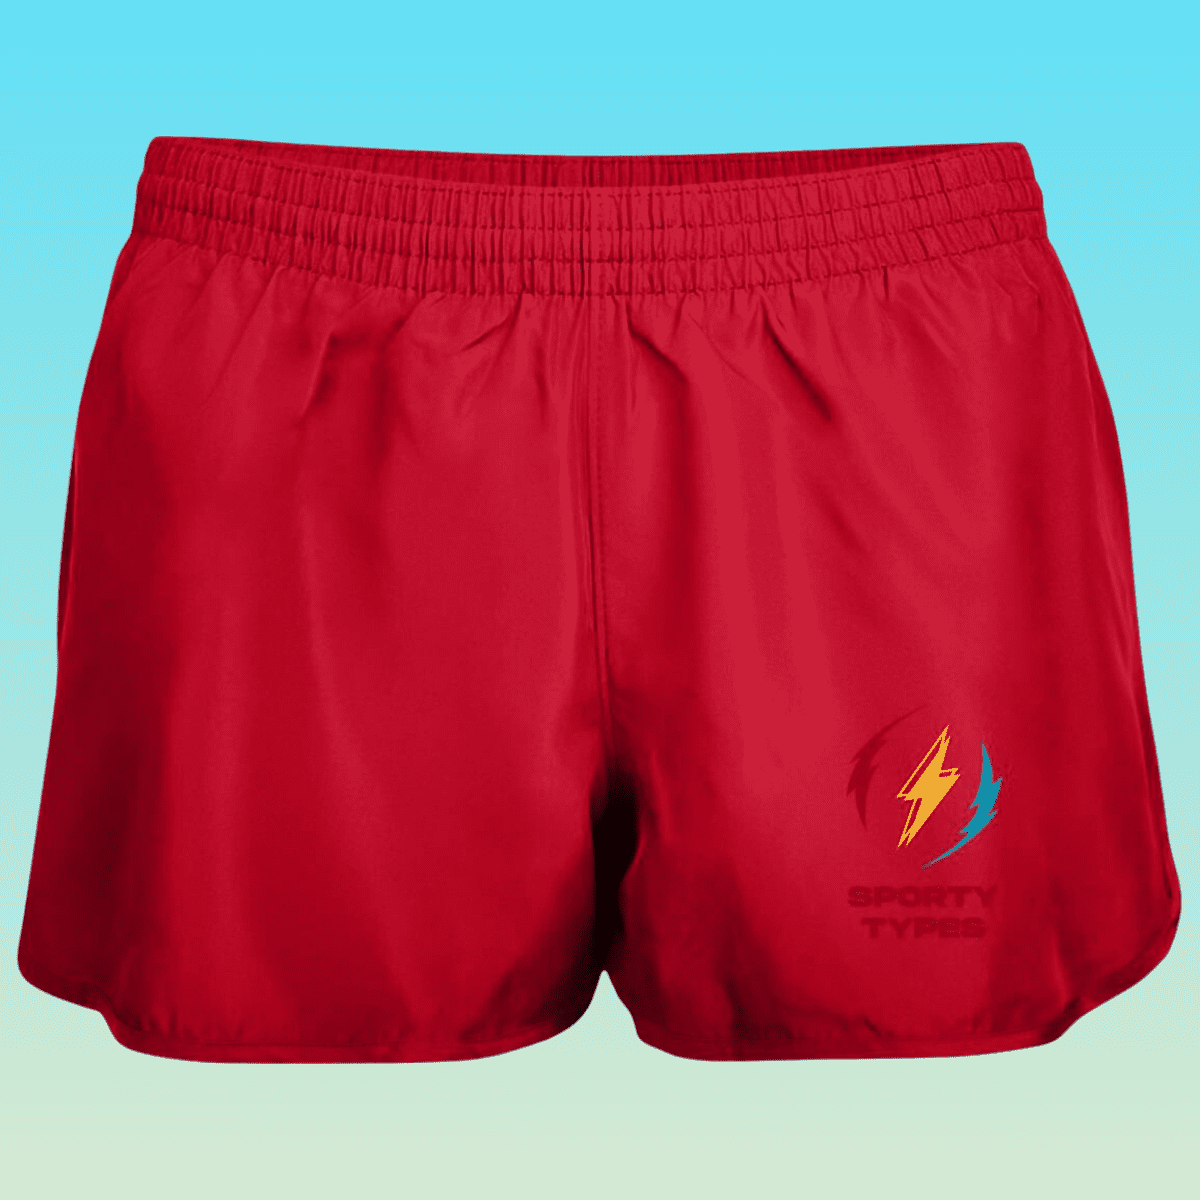 Women's Red Sporty Types  Running Shorts